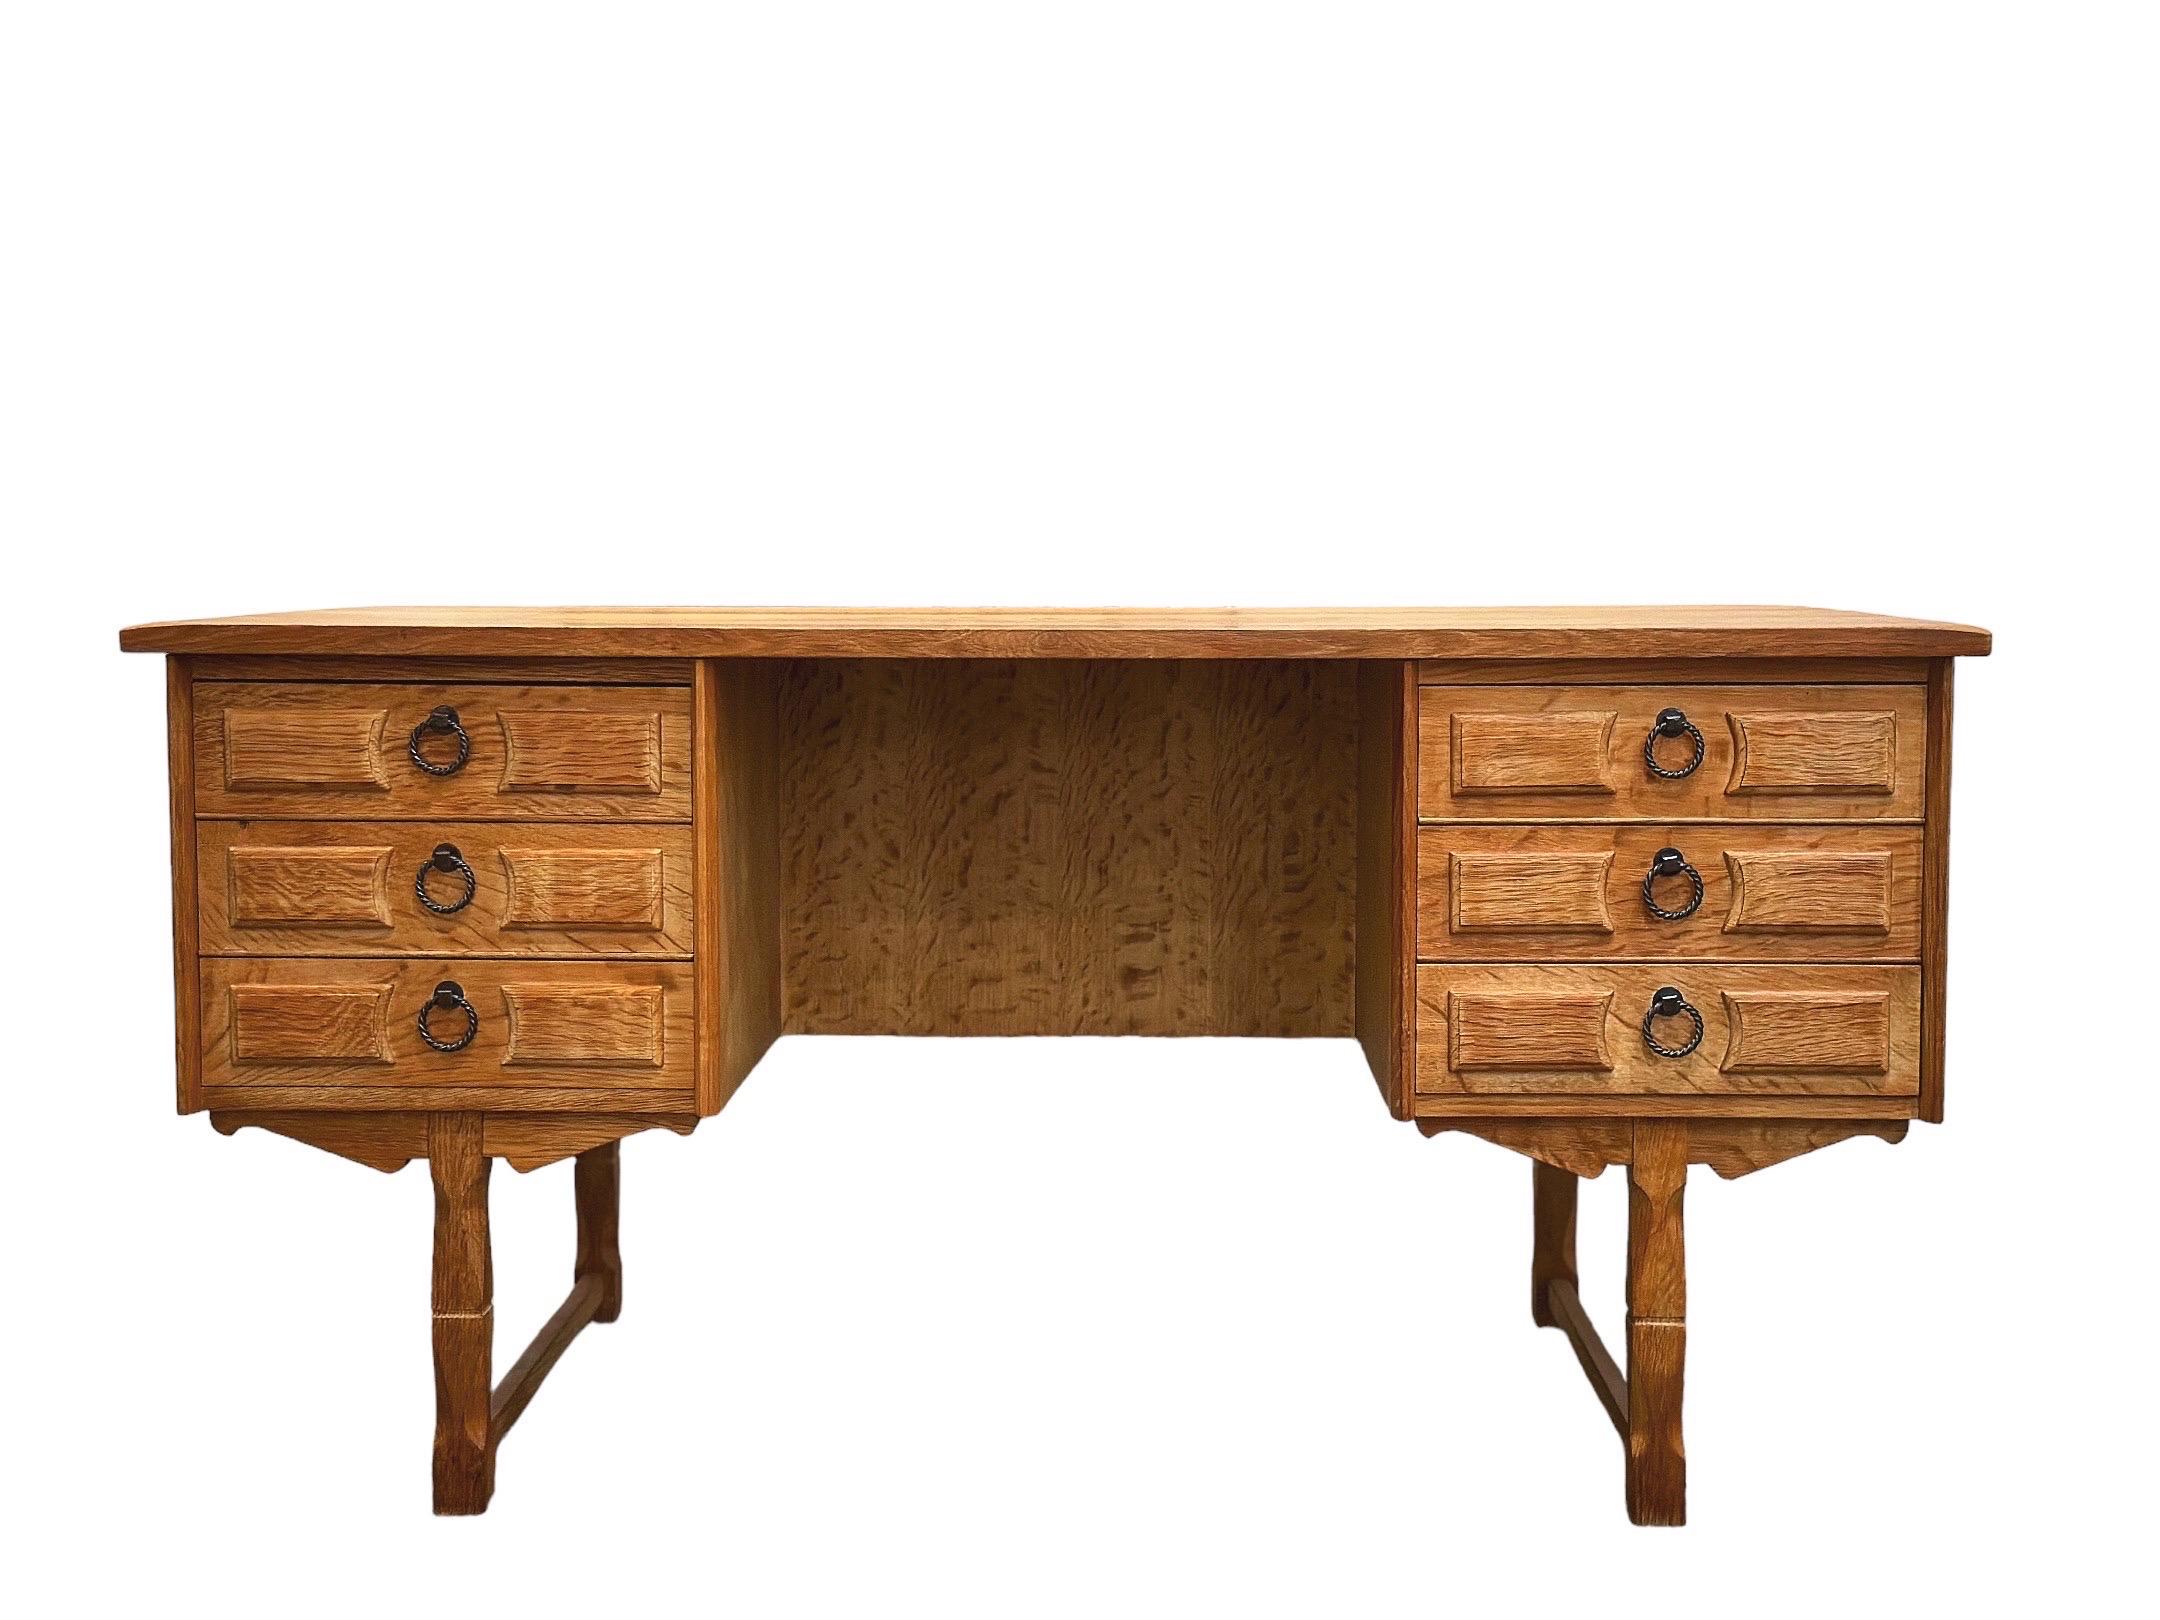 Vintage executive writing desk in Nordic white oak by Henning Kjaernulf. Exquisite Danish design and craftsmanship. Finished with cubbies on the backside allowing the desk to be featured floating in a room. Six drawers. Staved solid oak top features